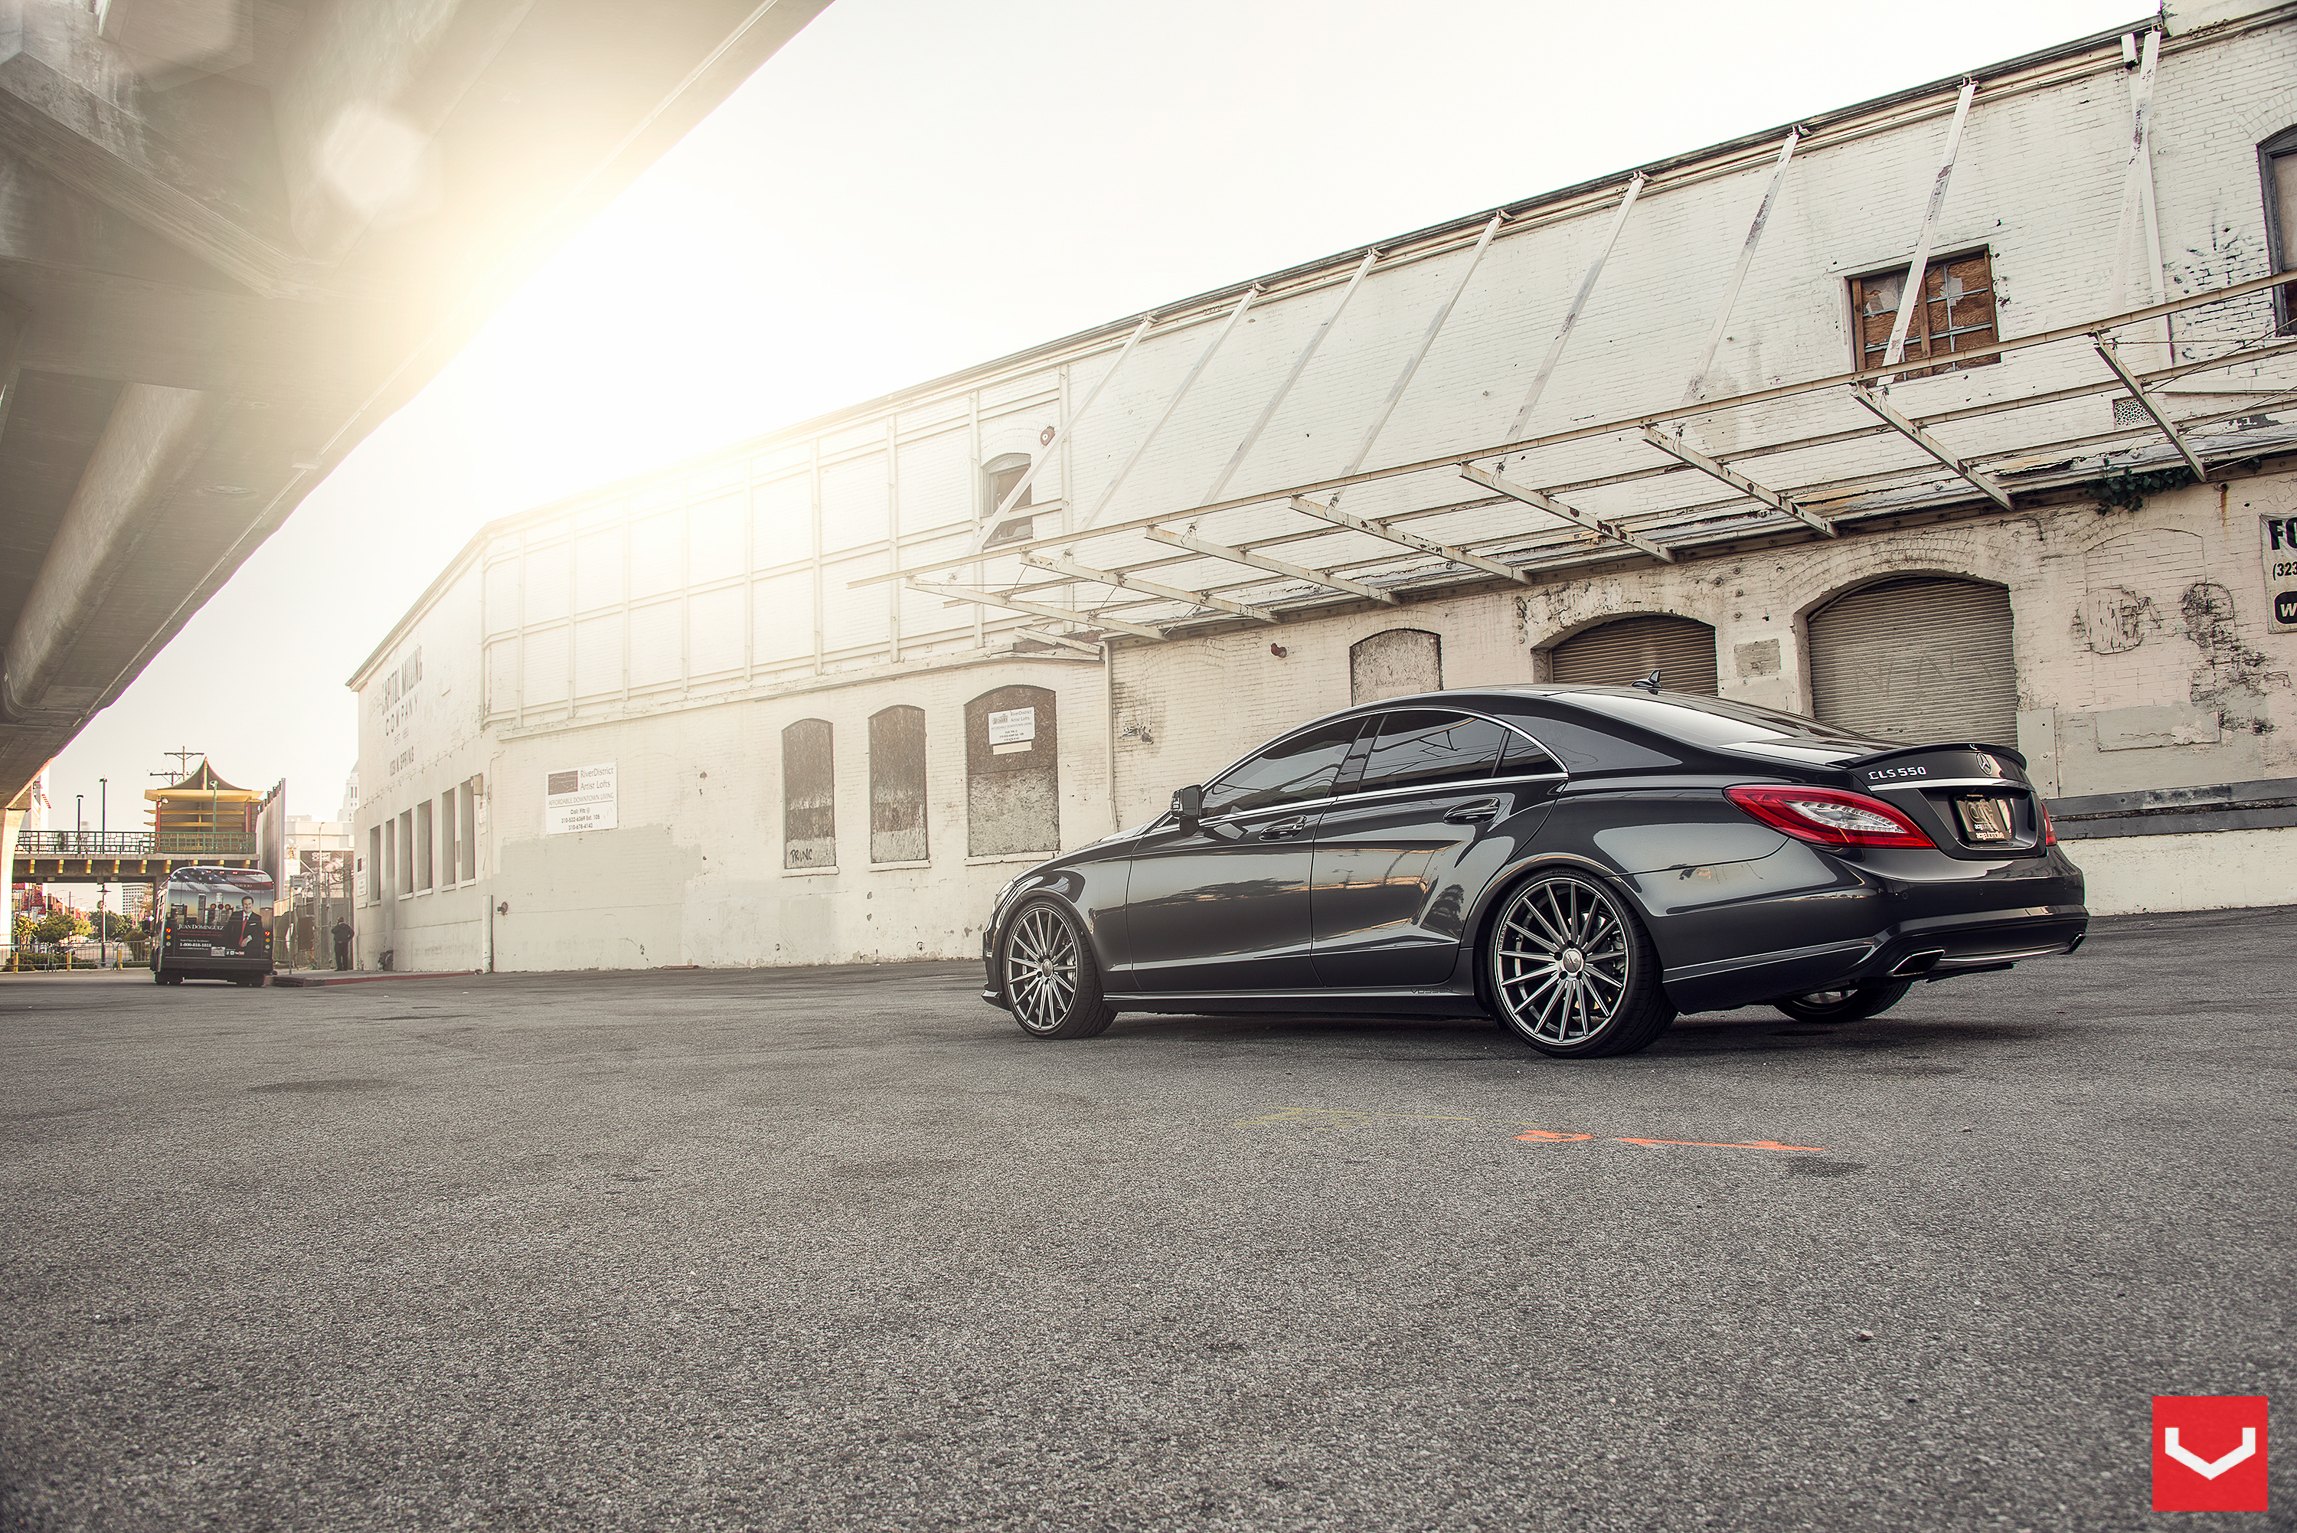 Aftermarket Taillights on Gray Mercedes CLS - Photo by Vossen